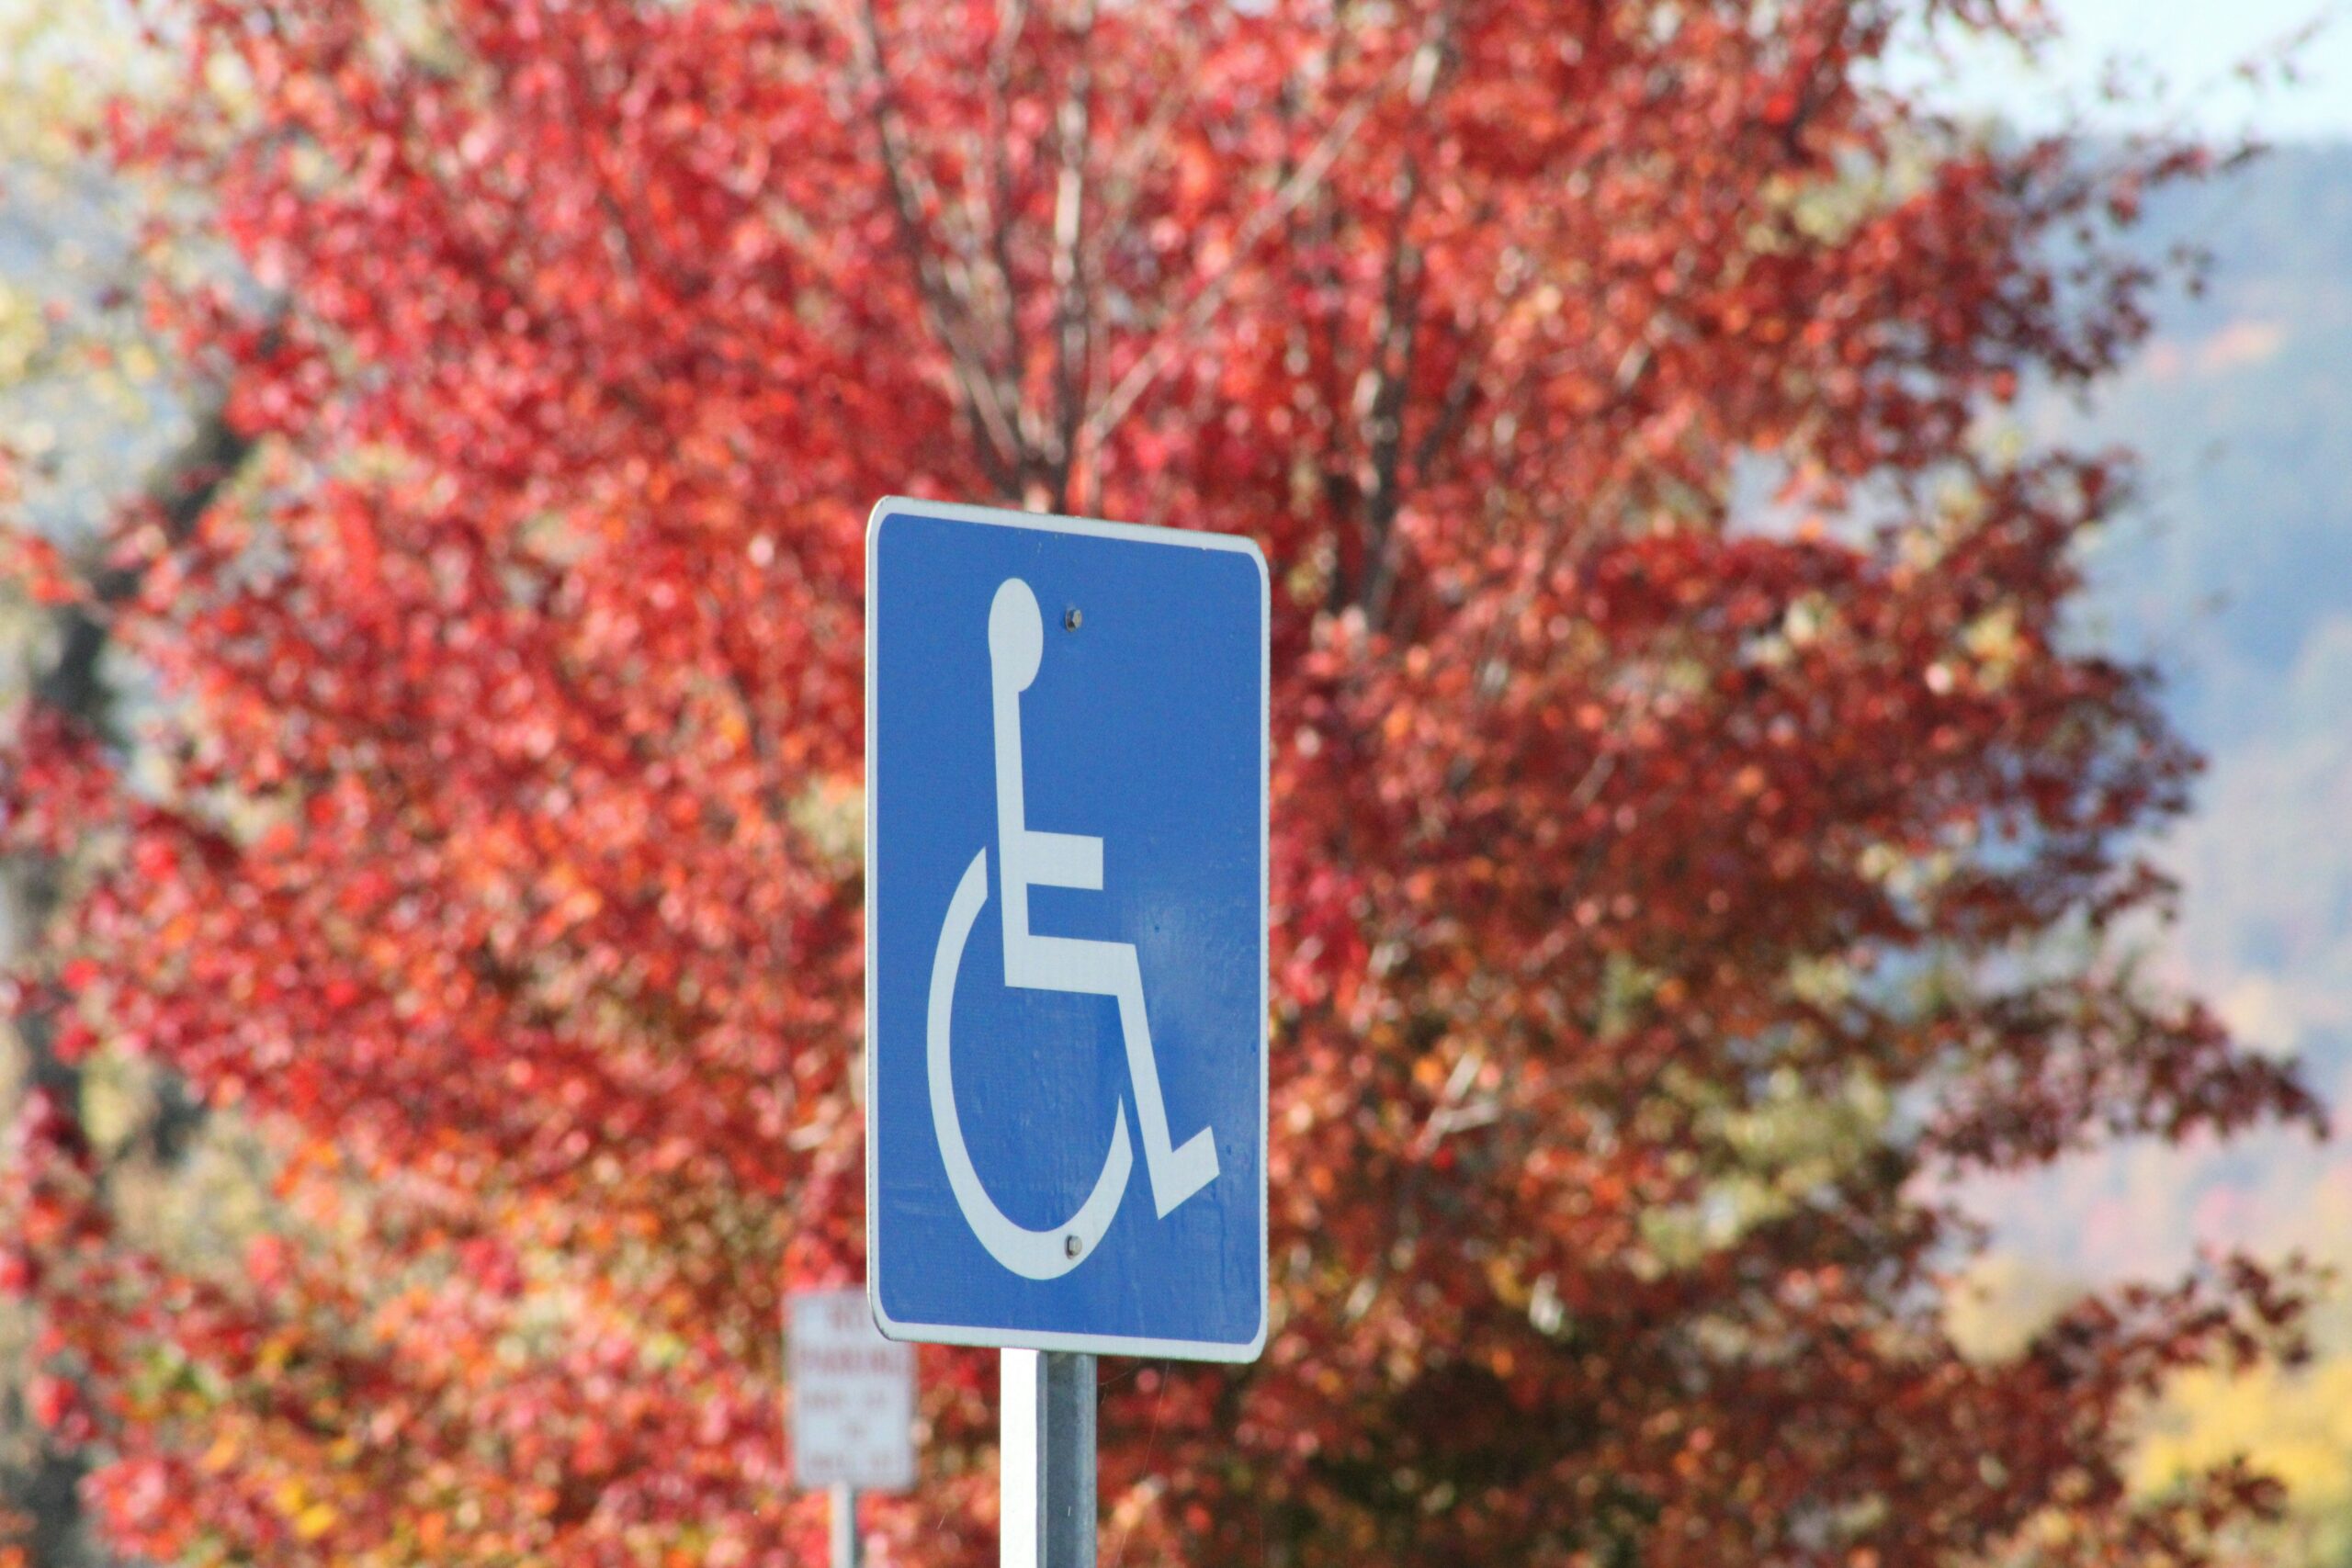 An accessible parking sign.